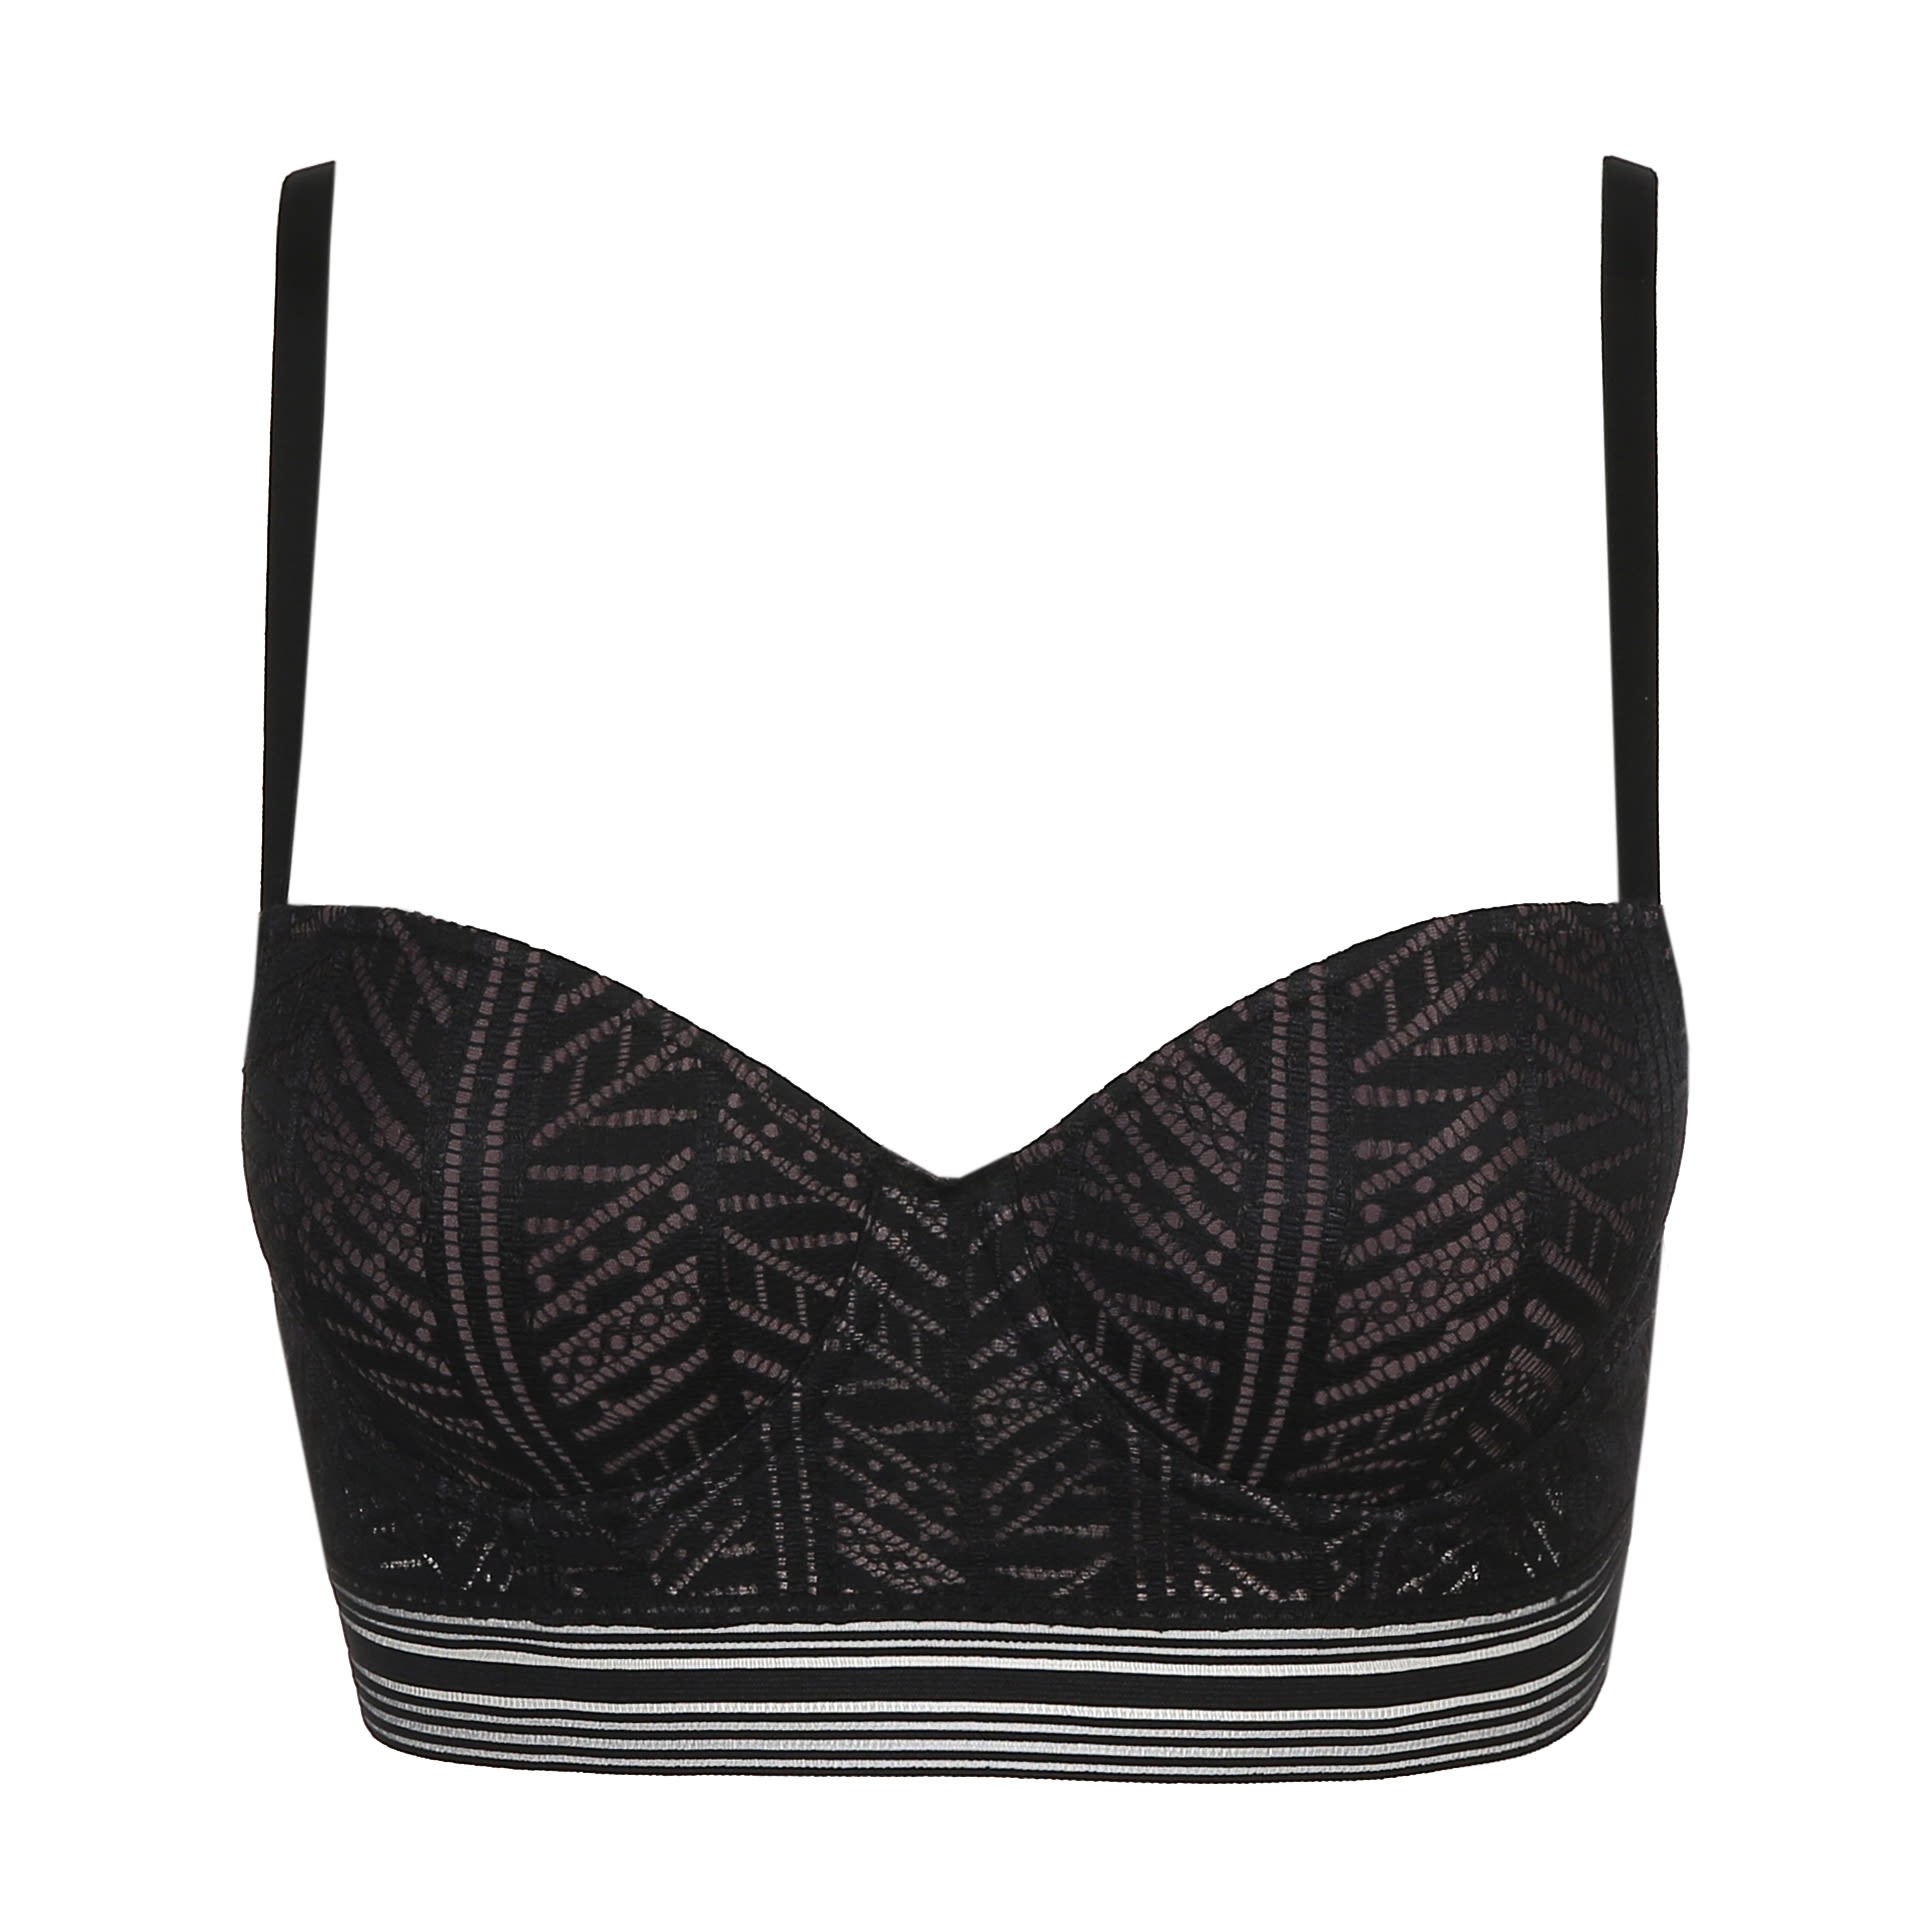 ▷ Marlon Bra Full Cup Lace Underwired Black White or Mixed (1 or 2 PACK) -  CENTRO COMERCIAL CASTELLANA 200 ◁